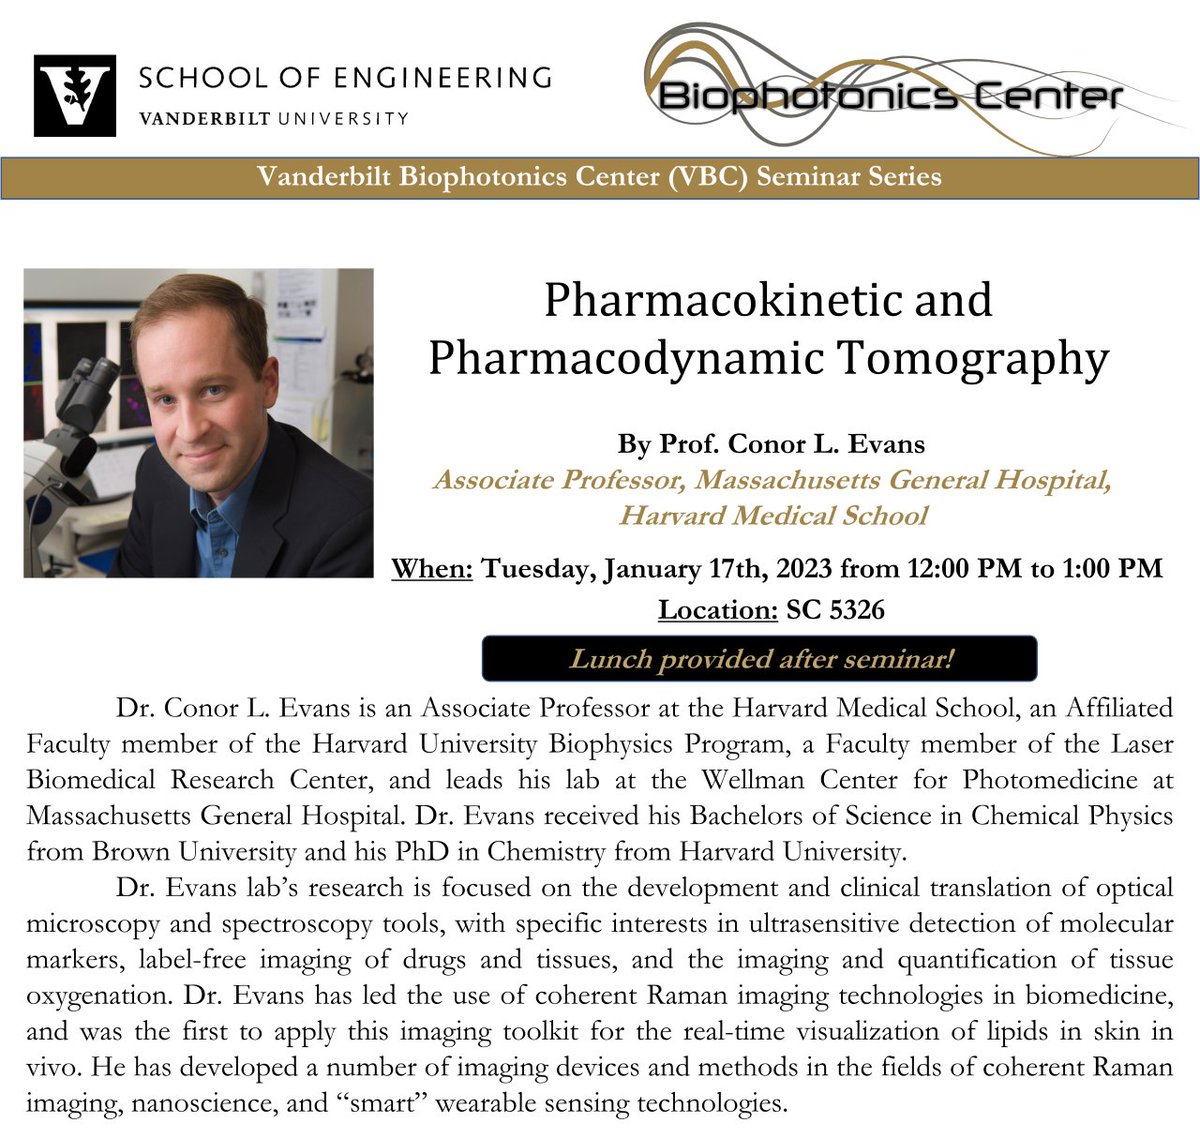 Another stellar add to the VU Biophotonics Center's seminar series. Check it out (and get free lunch!) on Tues, Jan 17th!